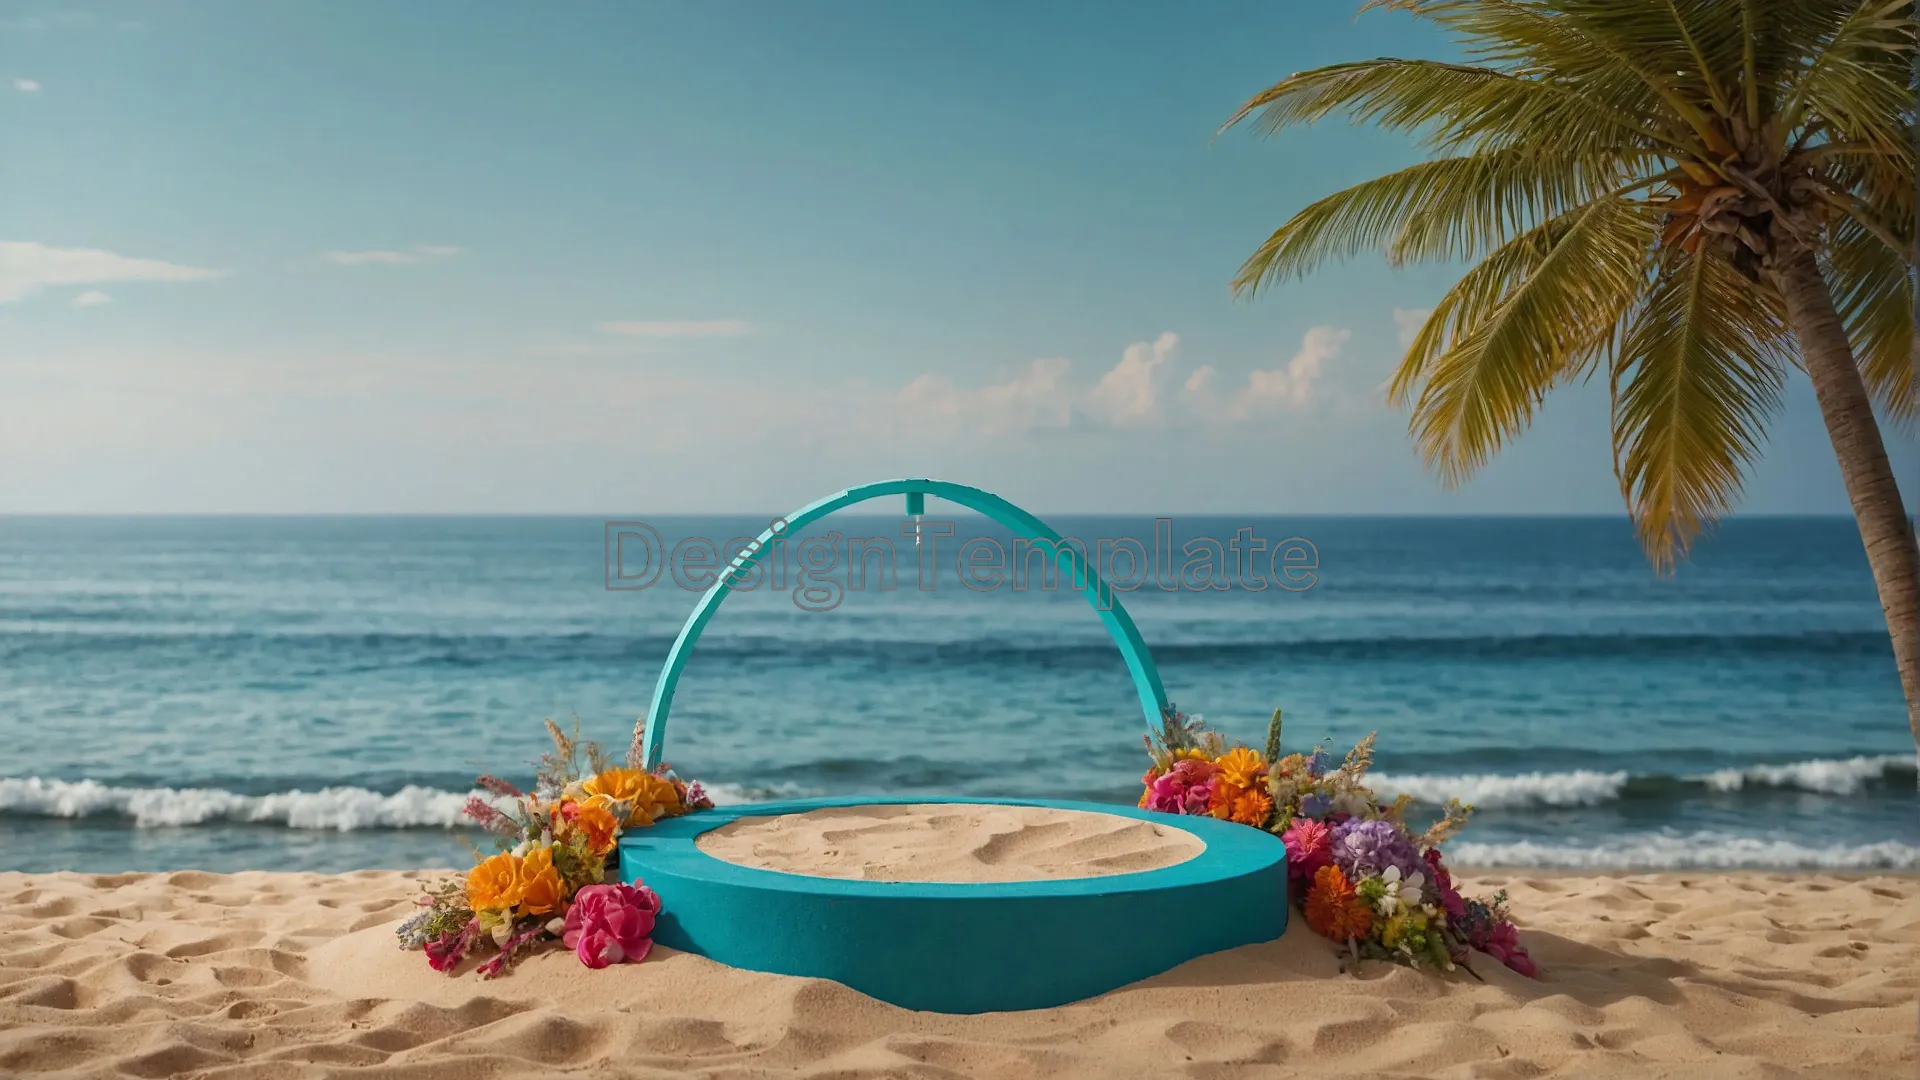 Captivating 3D Circle Podium Image with Fresh Colors for a Summer Sale Event image